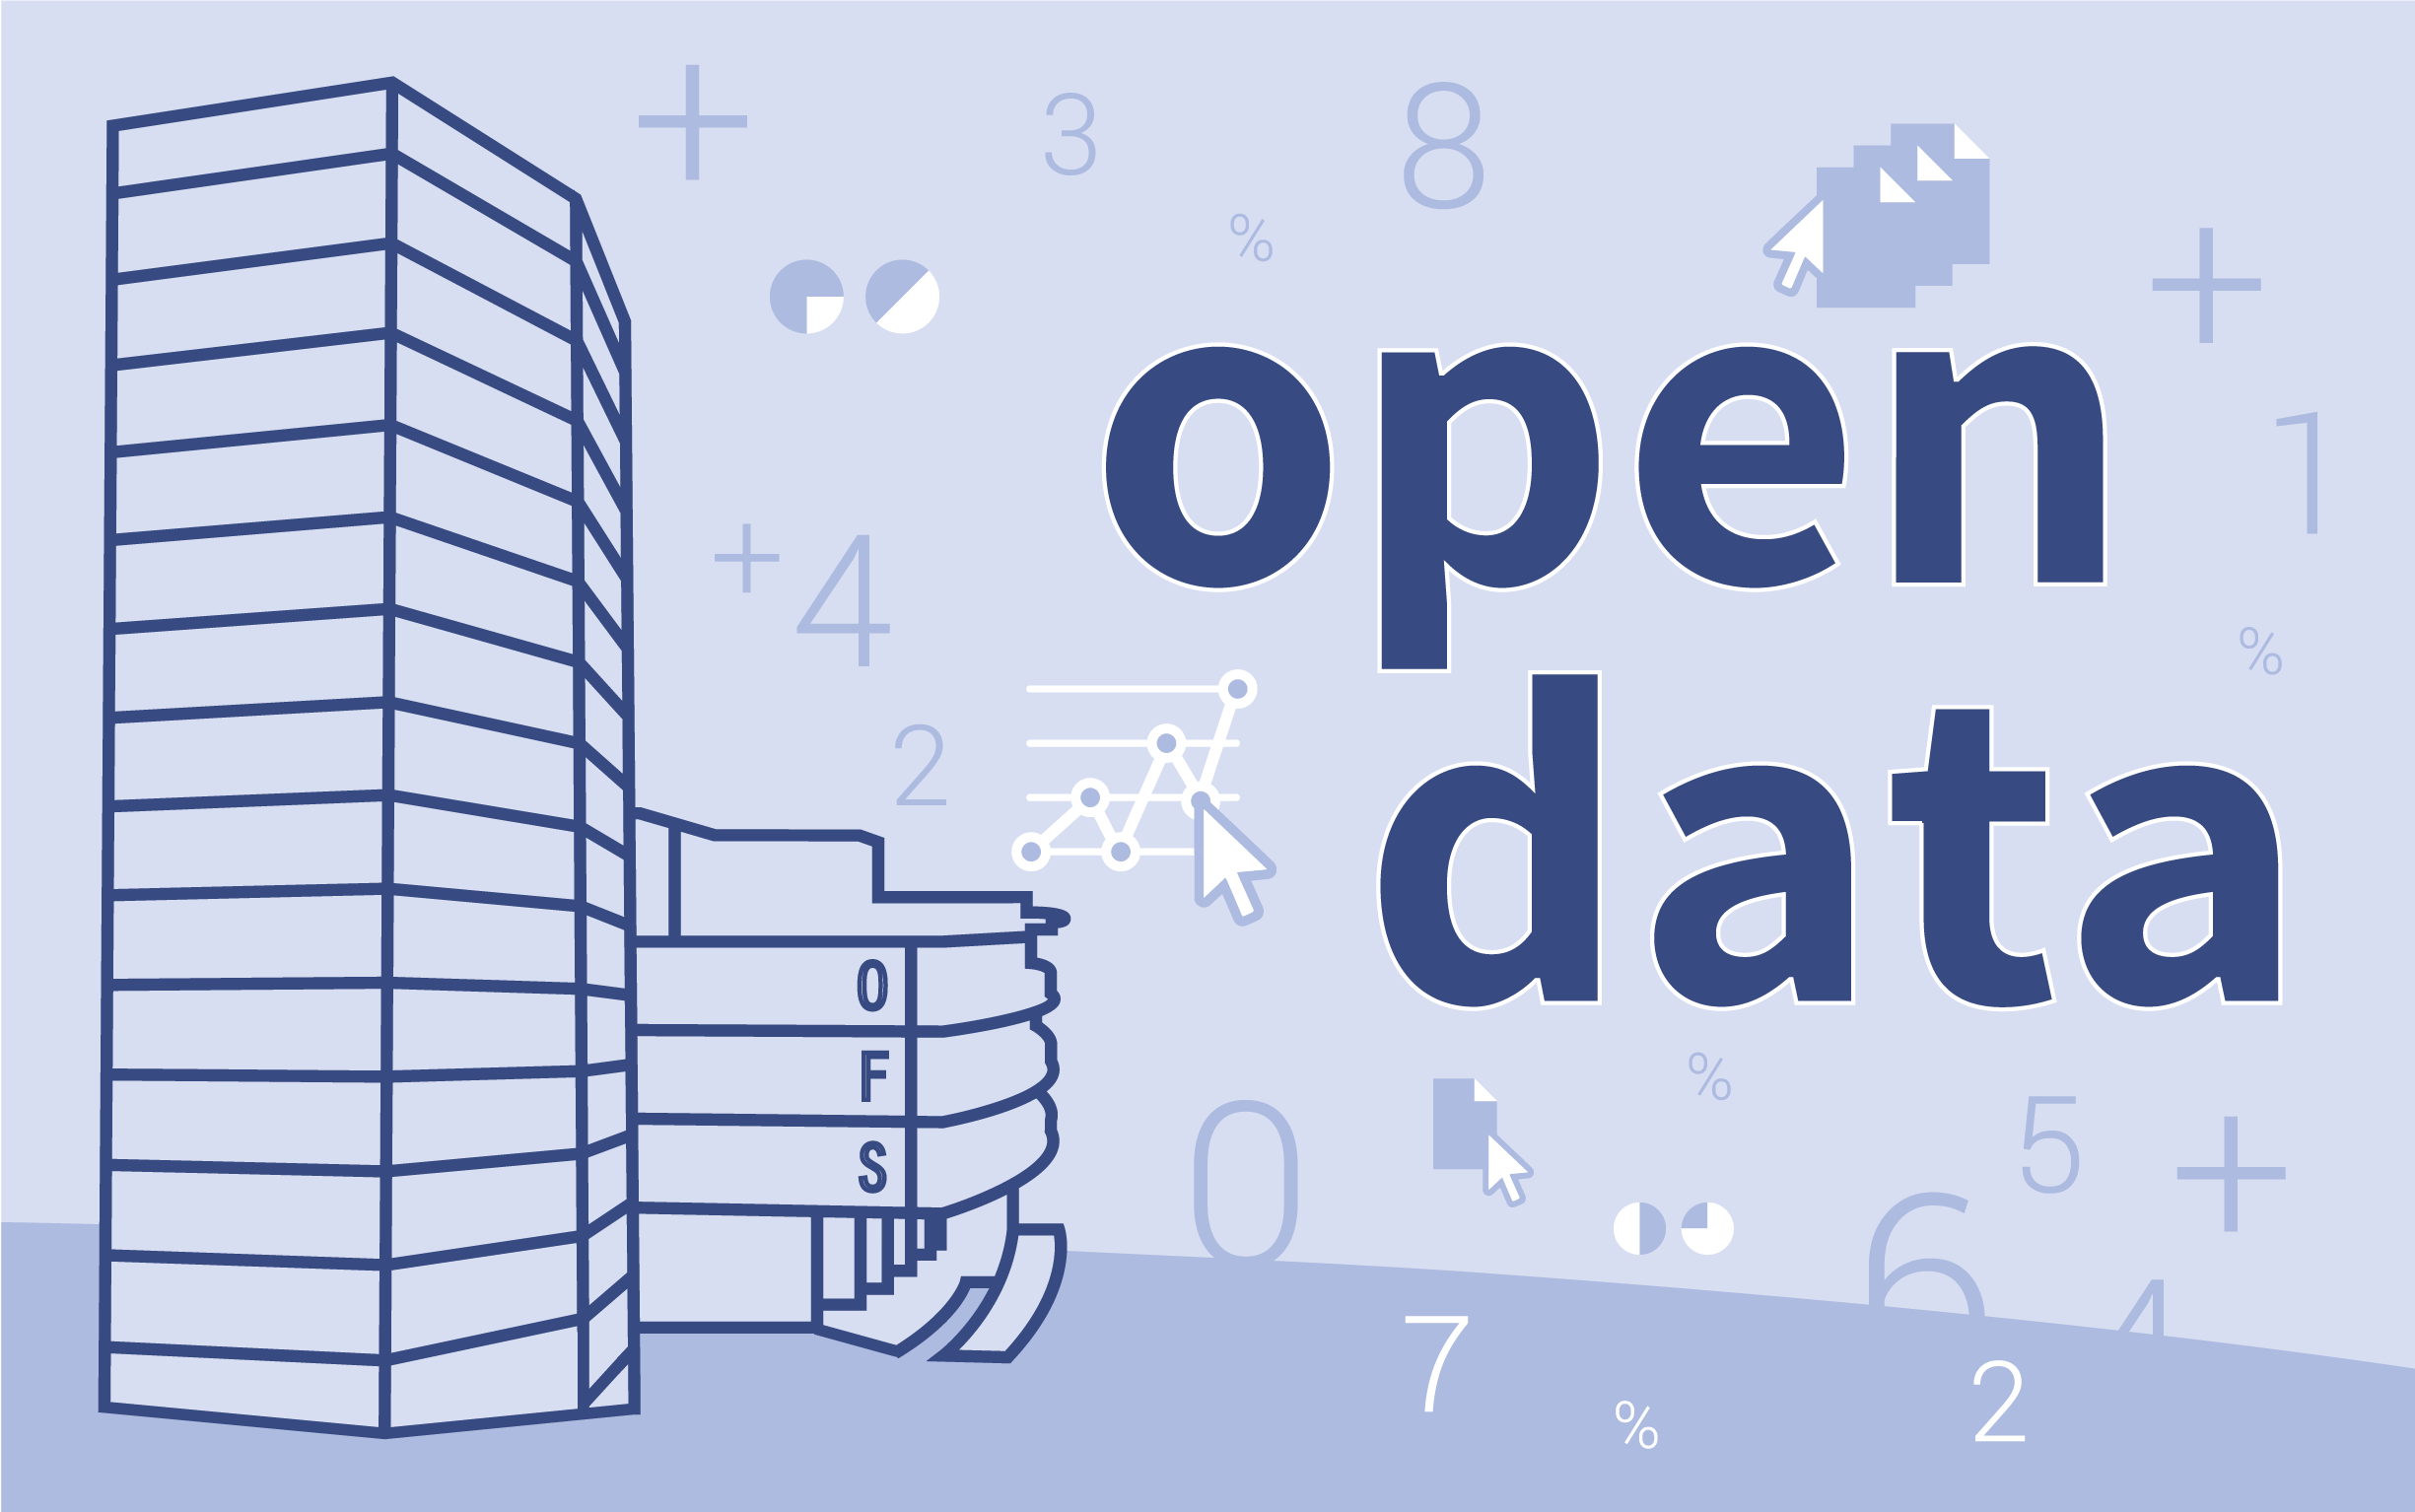 This image leads to more information about: Open Government Data (OGD)